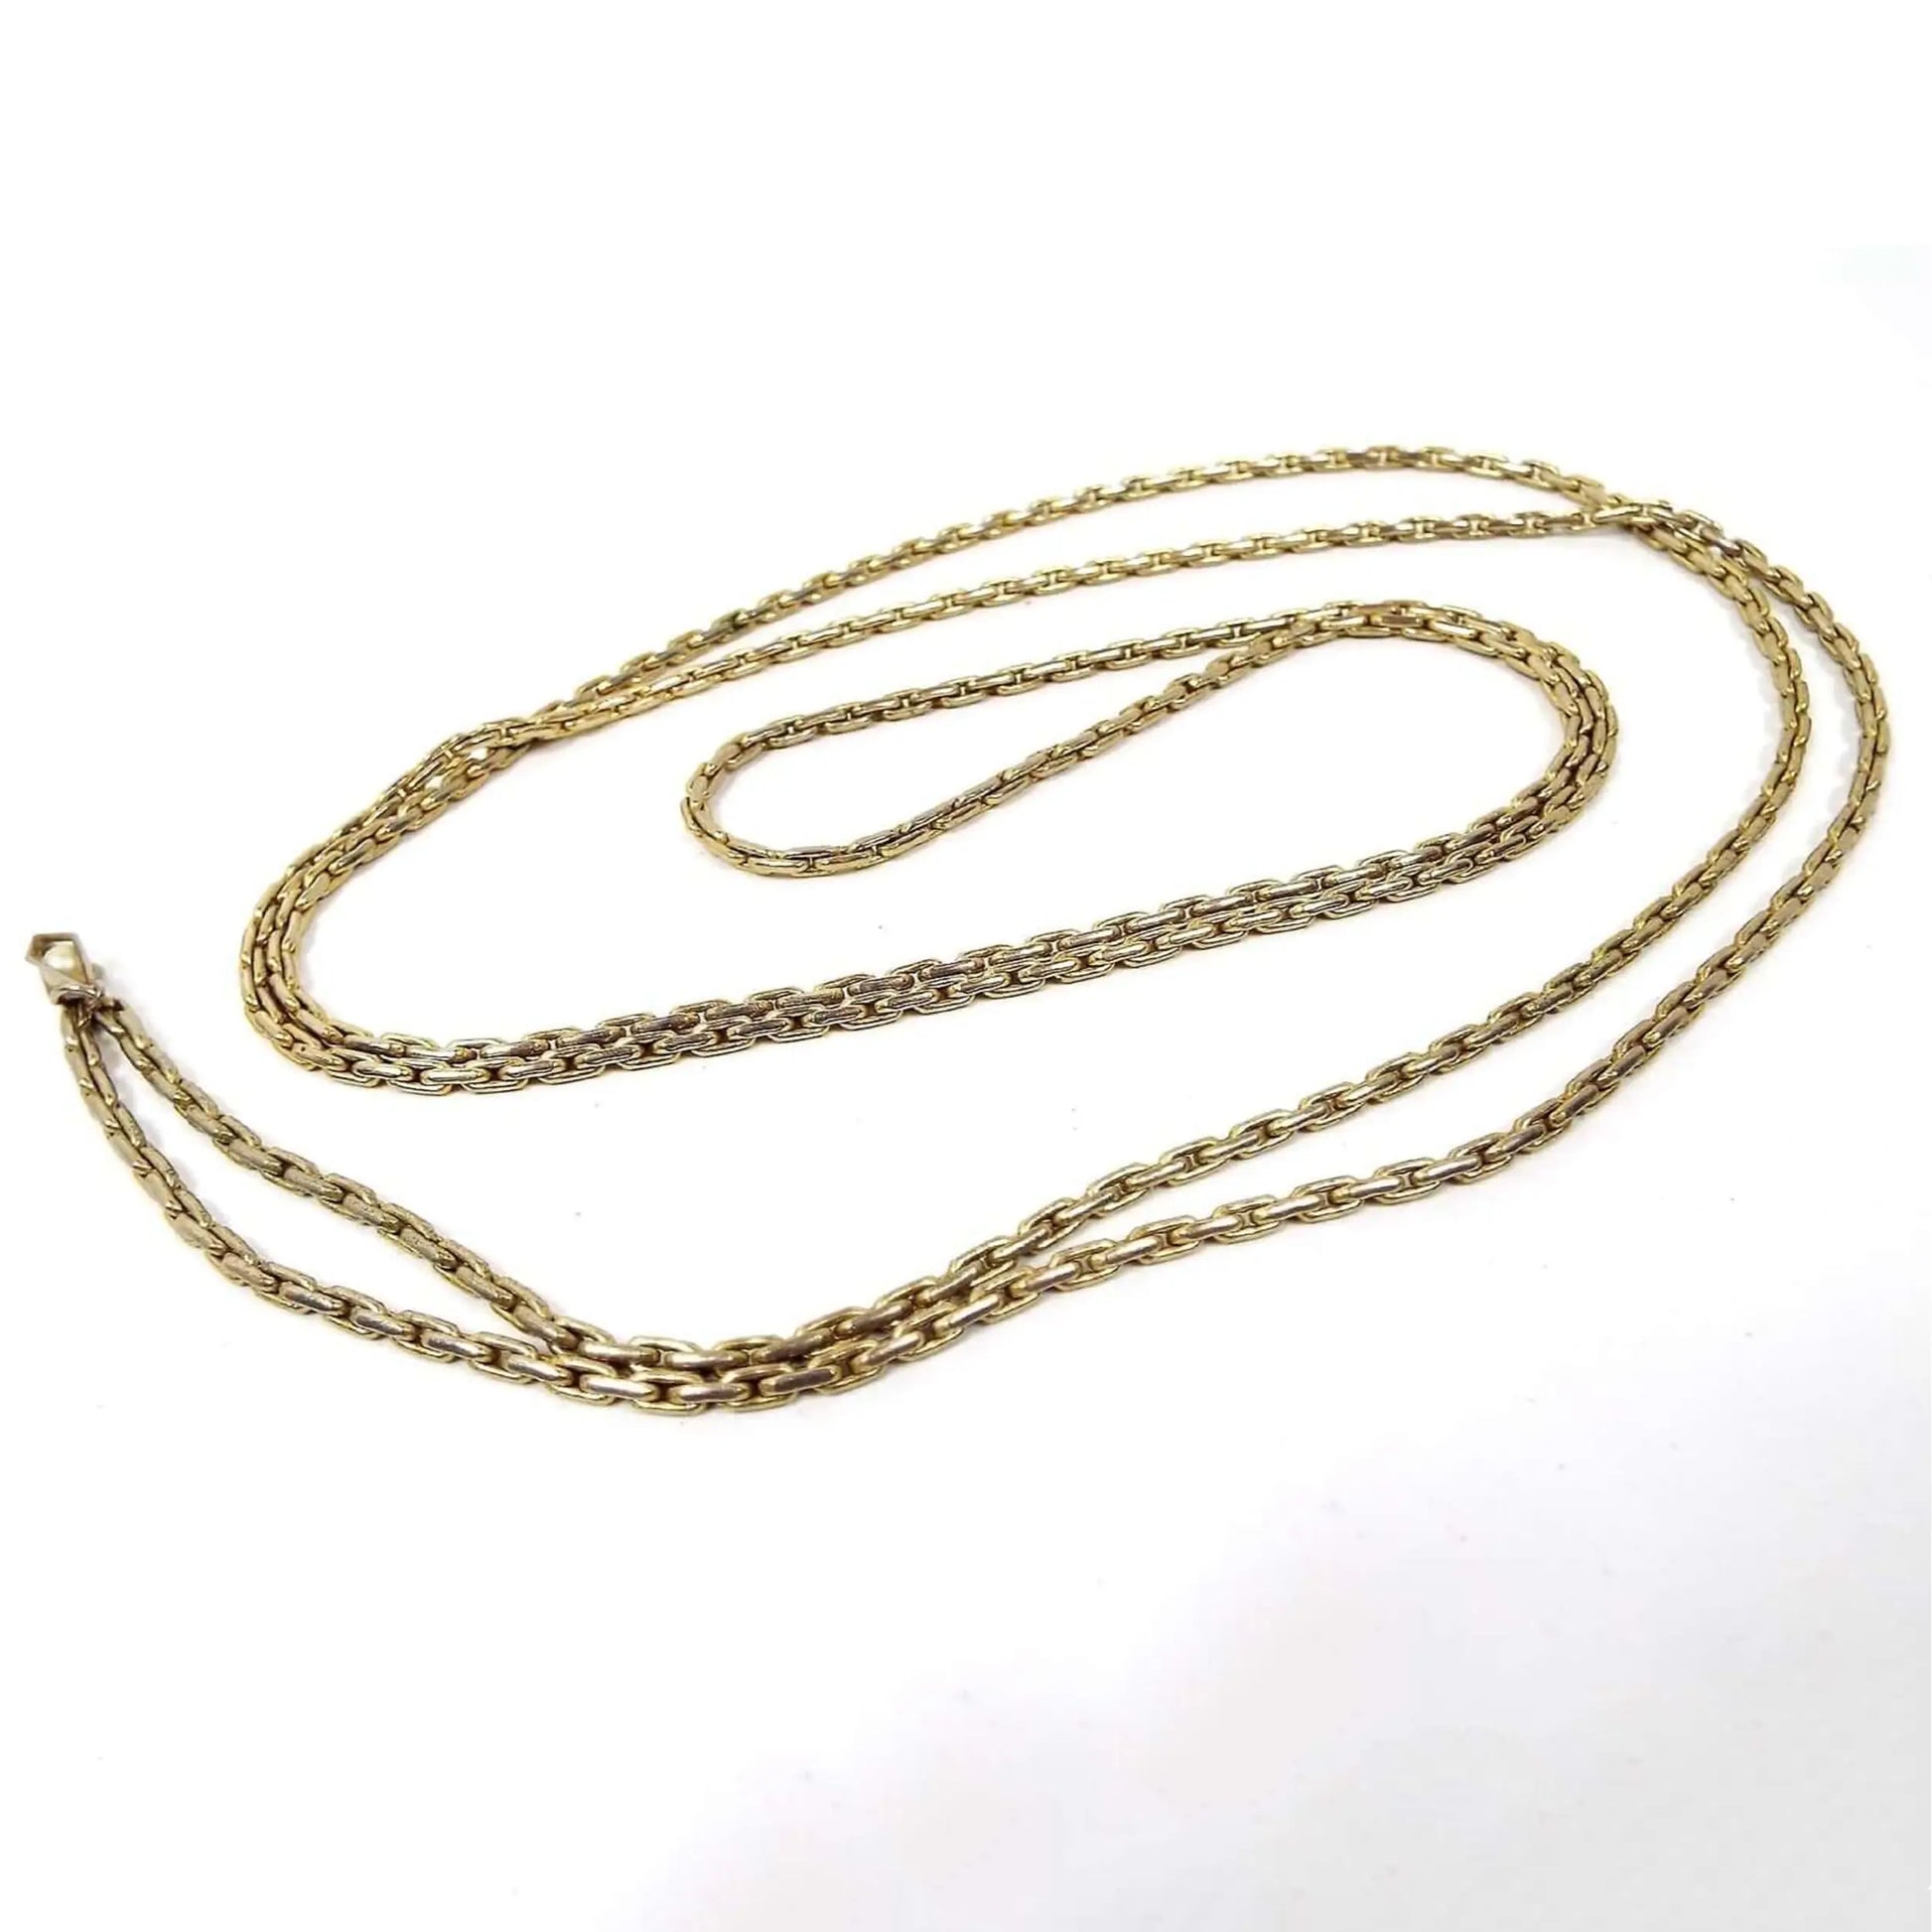 Top view of the retro vintage square link chain necklace. The metal is gold tone in color and a fancy rounded edge square link design. At the end there is a small faceted bottom teardrop charm with a faux pearl in it. There is no clasp as it's long and goes over your head.